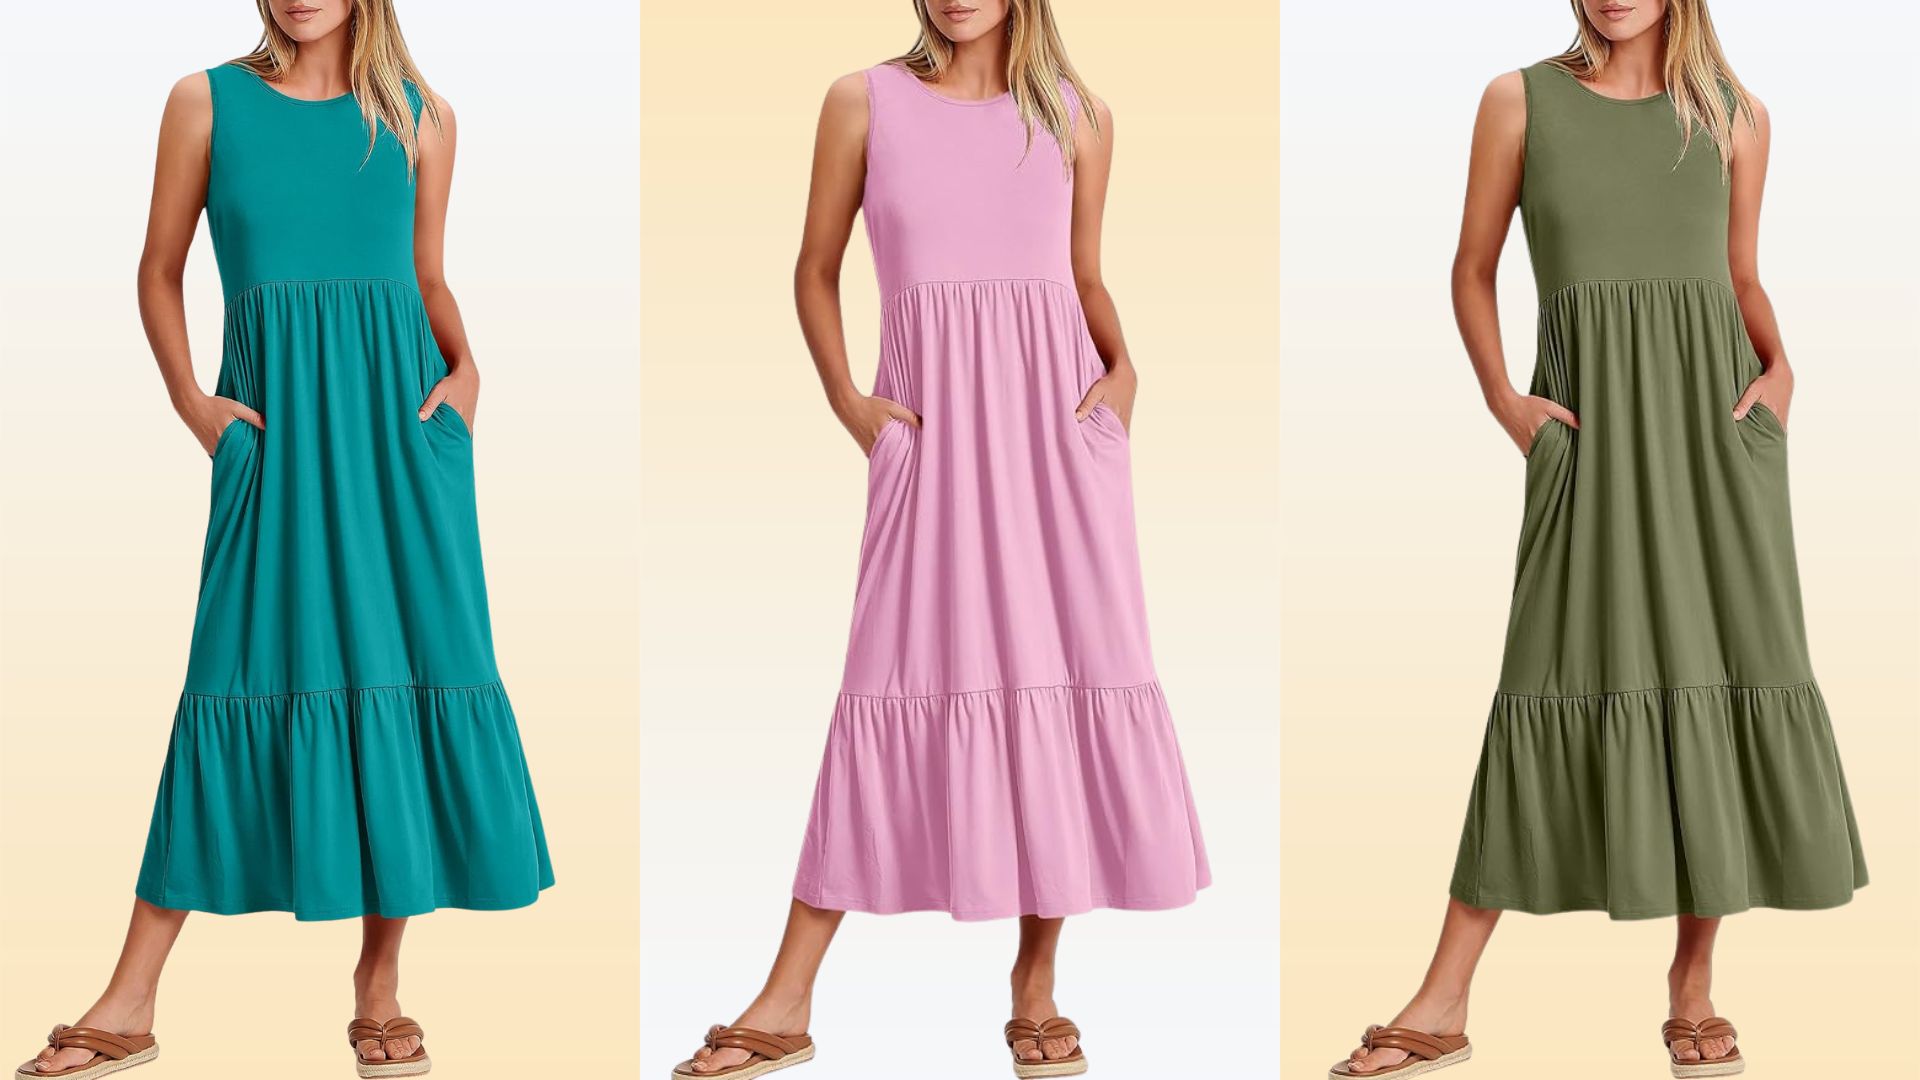 The deal is so good, why not grab the dress in multiple colors? (Amazon)